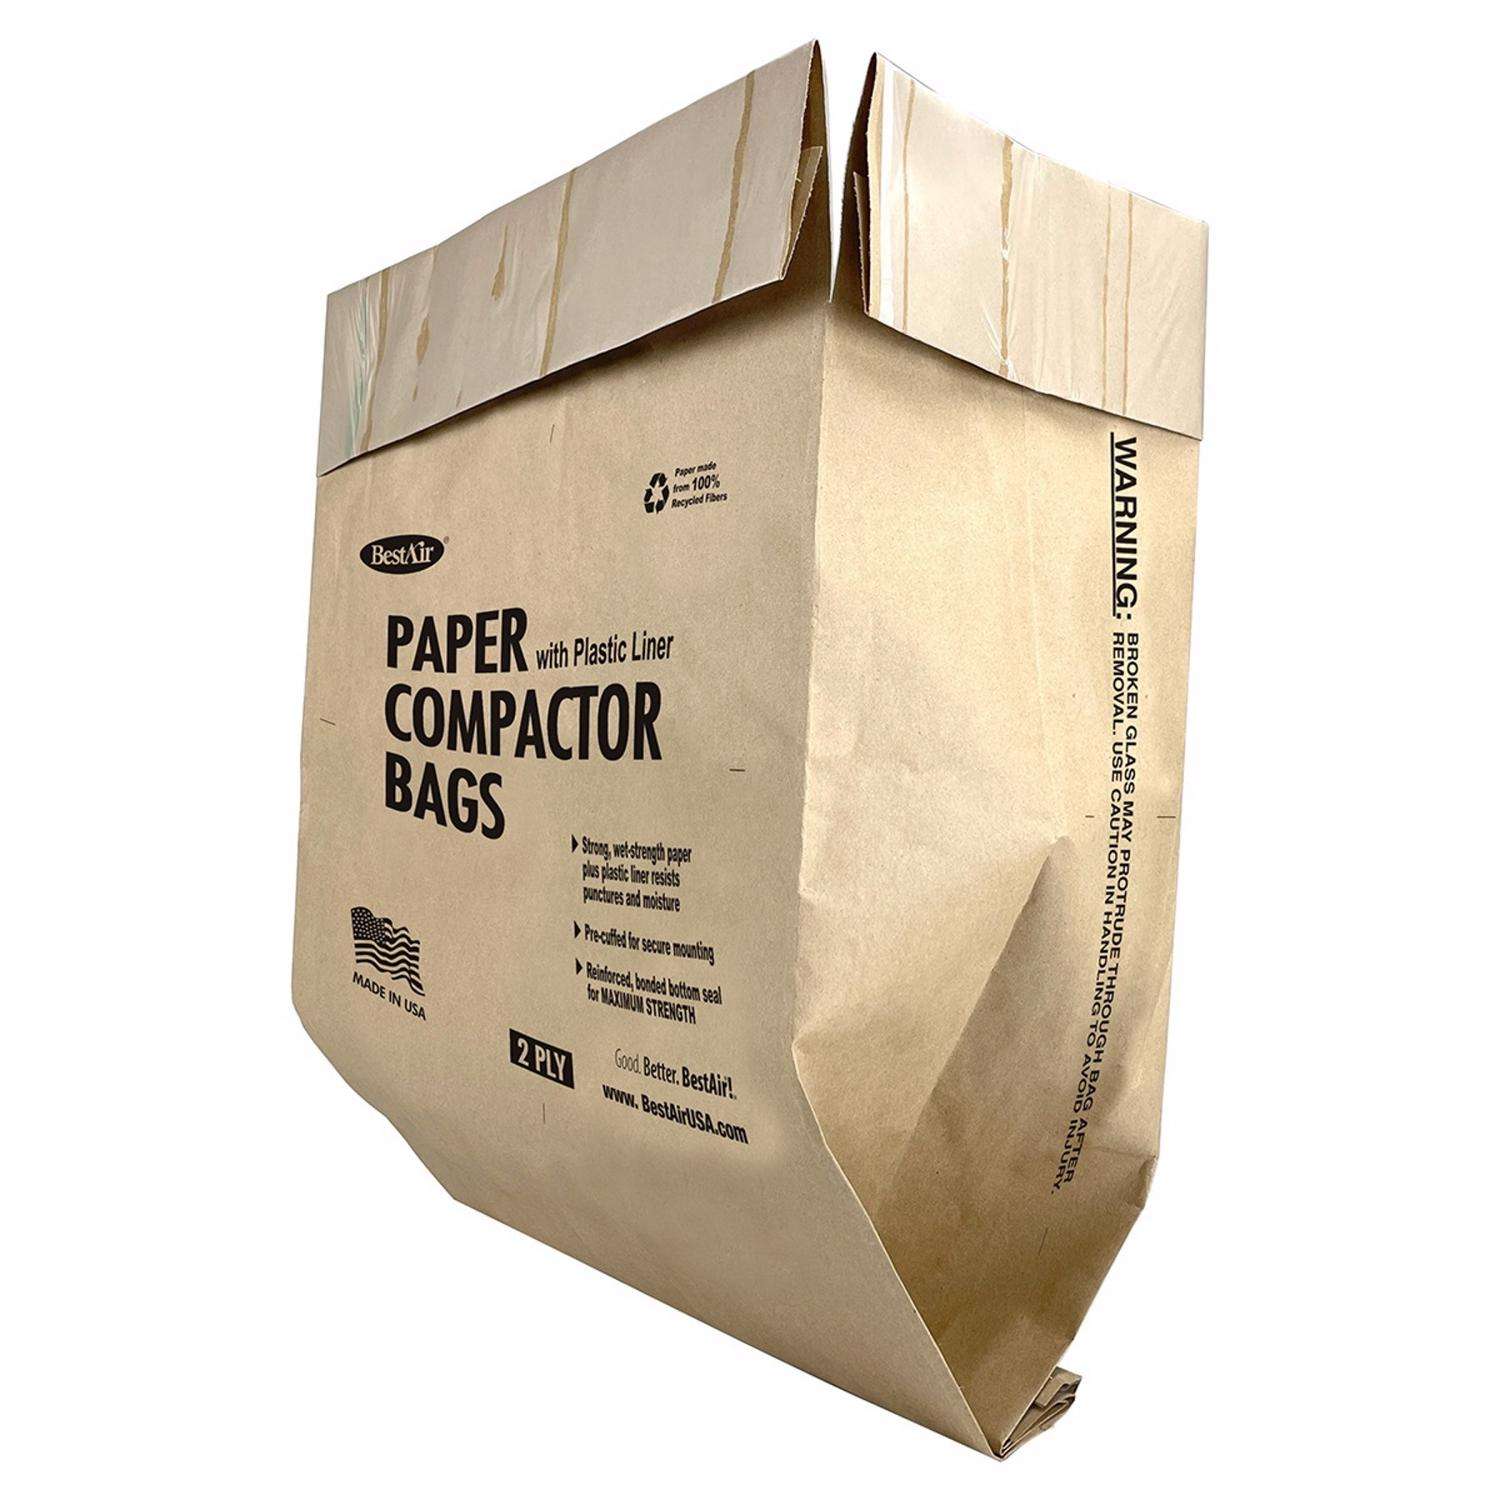 All Compactor Bags